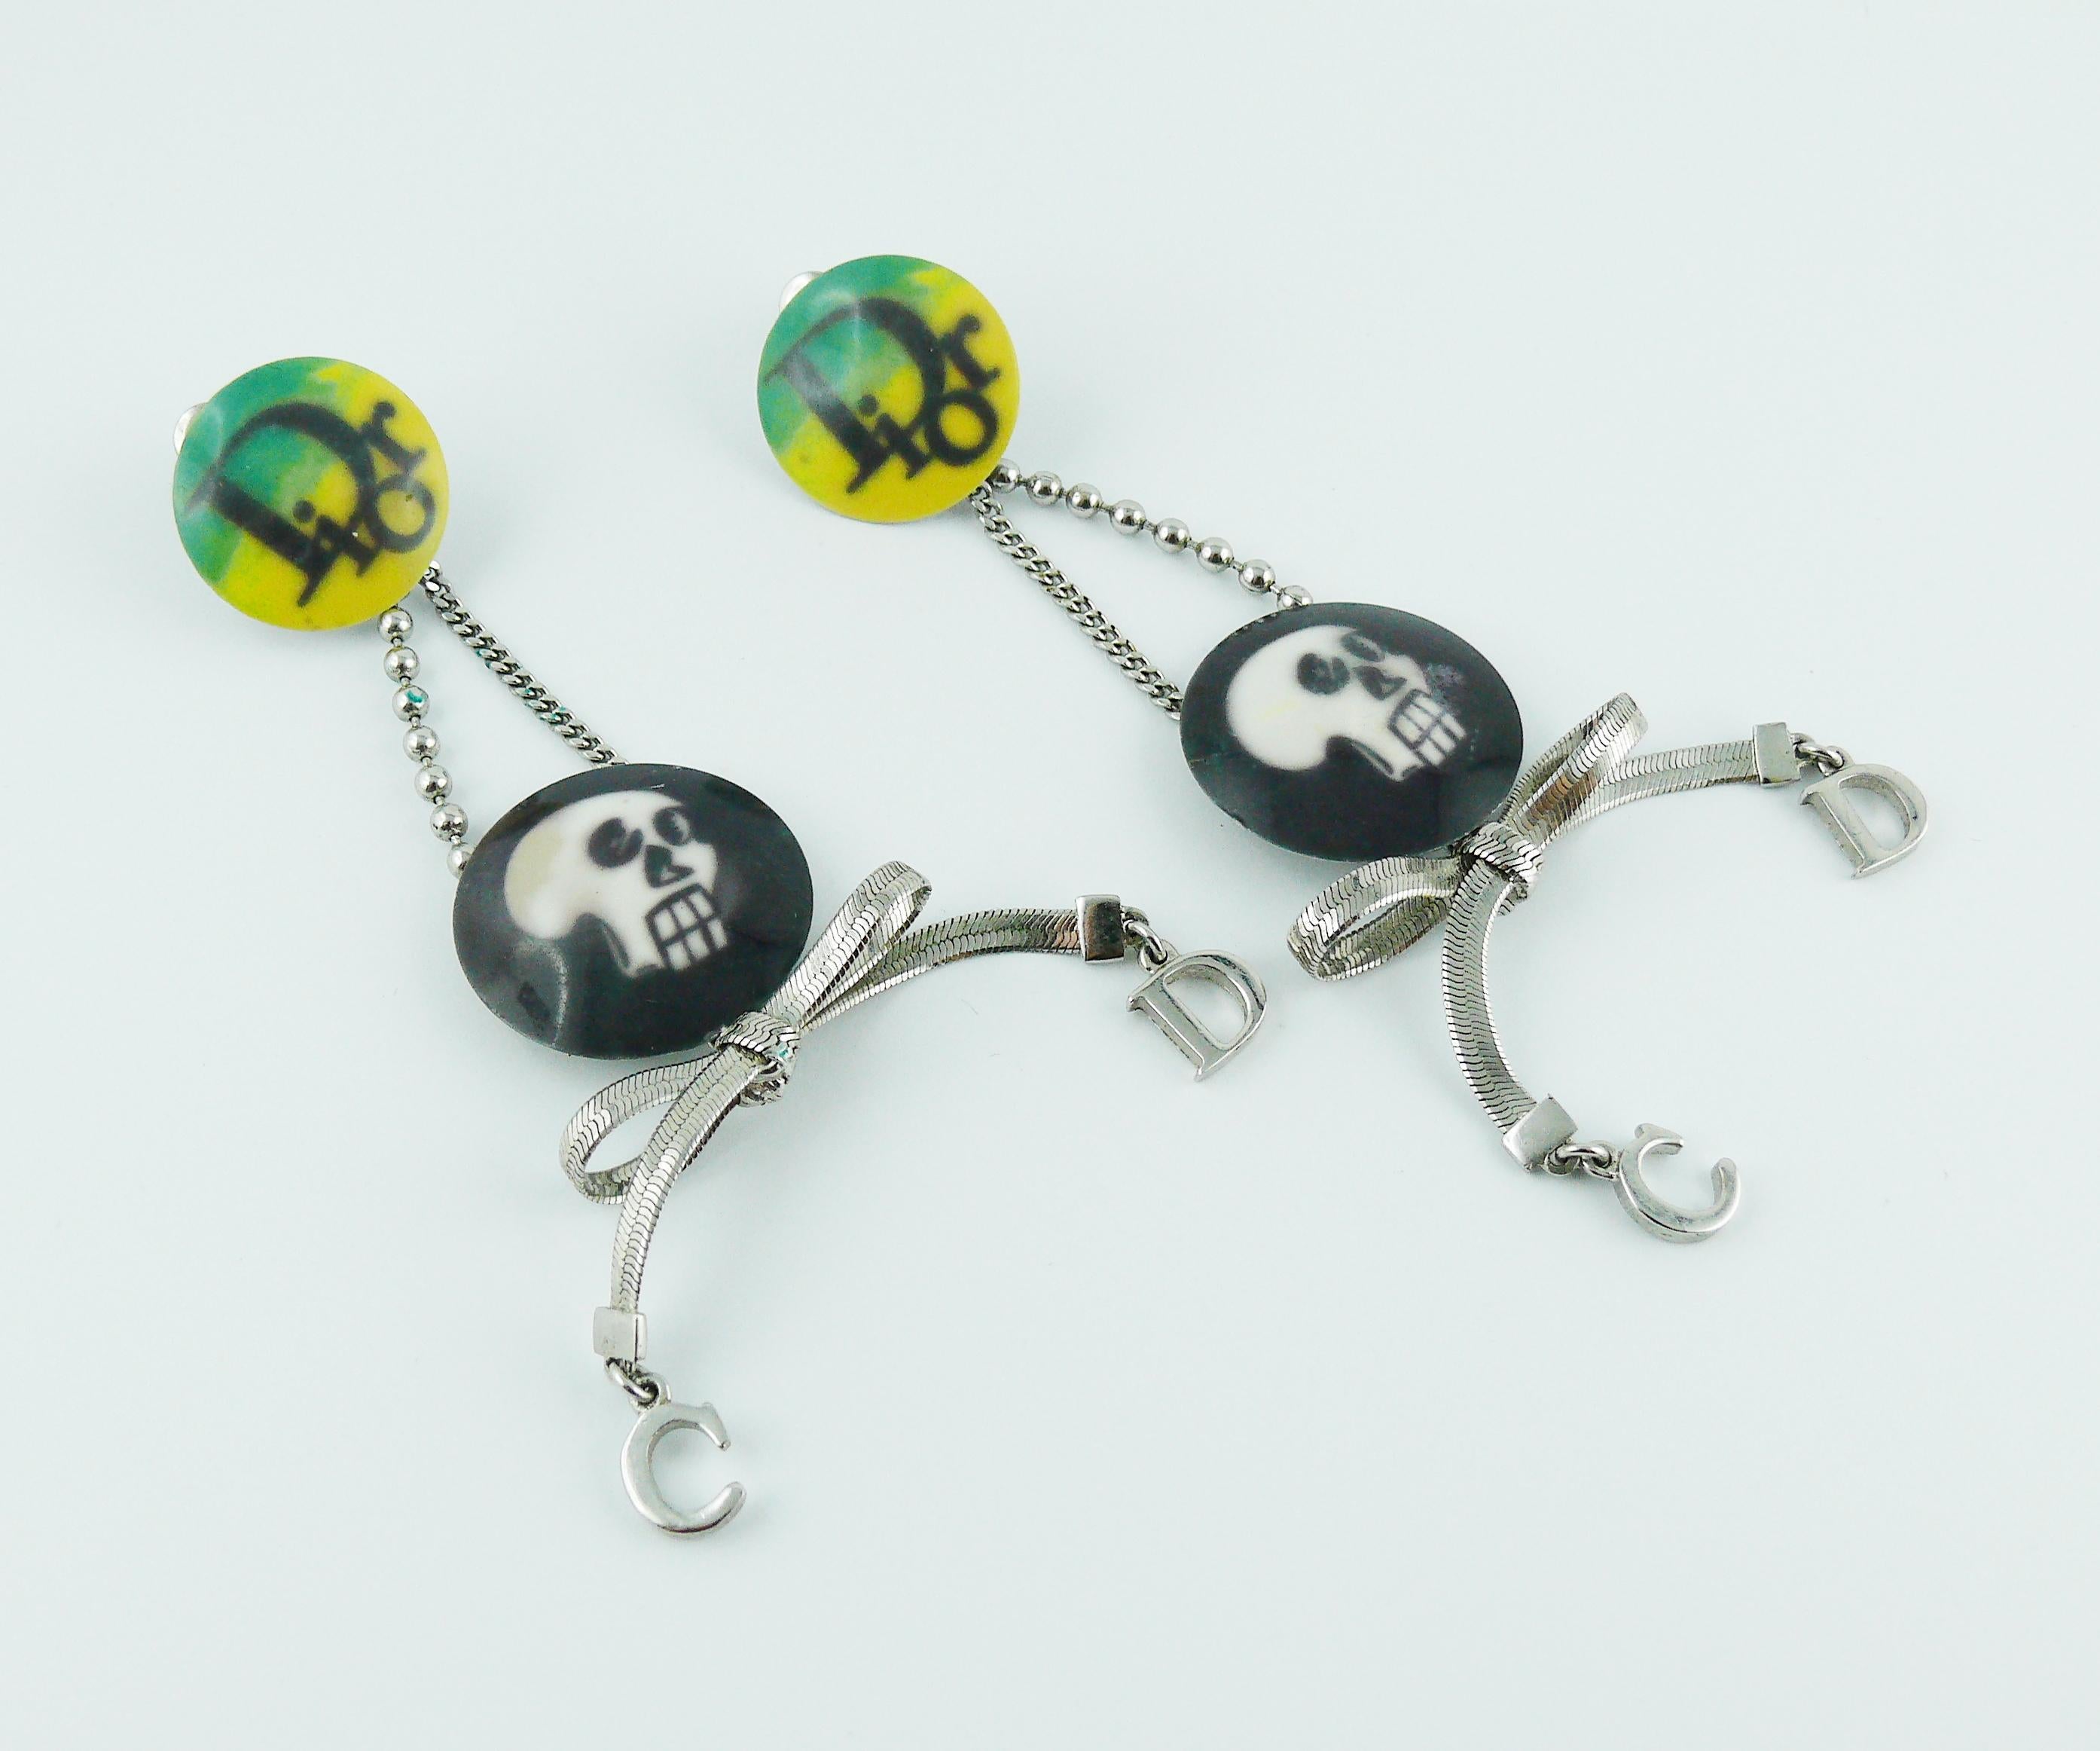 CHRSITIAN DIOR silver toned dangle earrings (clip-on) featuring a skull print coin and hanging CD initials.

Unmarked.

Indicative measurements : length approx. 10 cm (3.94 inches) / max. width approx. 3 cm (1.18 inches).

JEWELRY CONDITION CHART
-